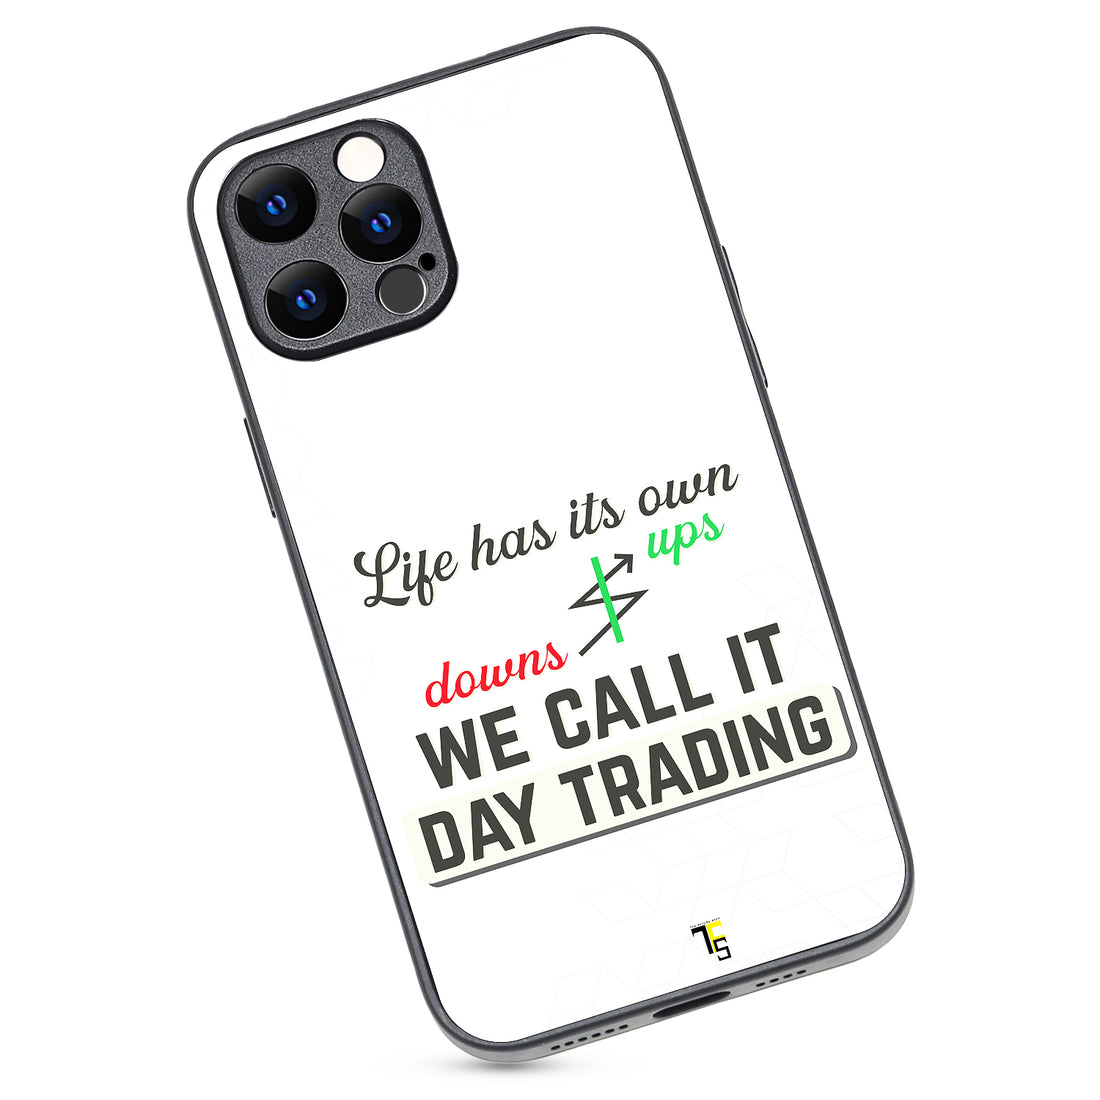 We Call It Trading iPhone 12 Pro Max Case